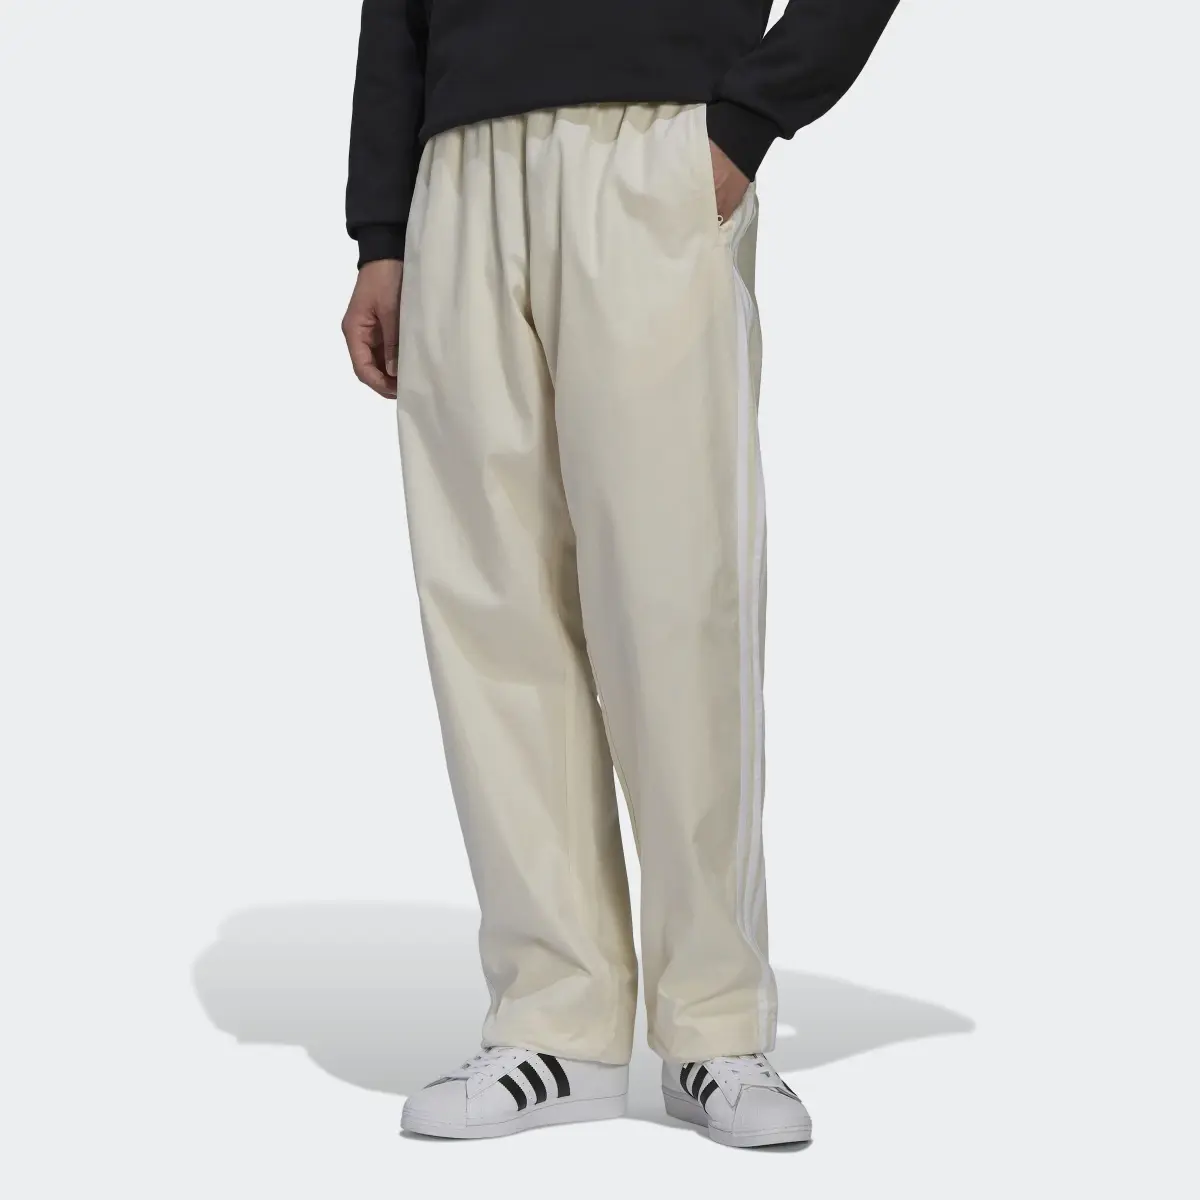 Adidas Work Trousers. 1